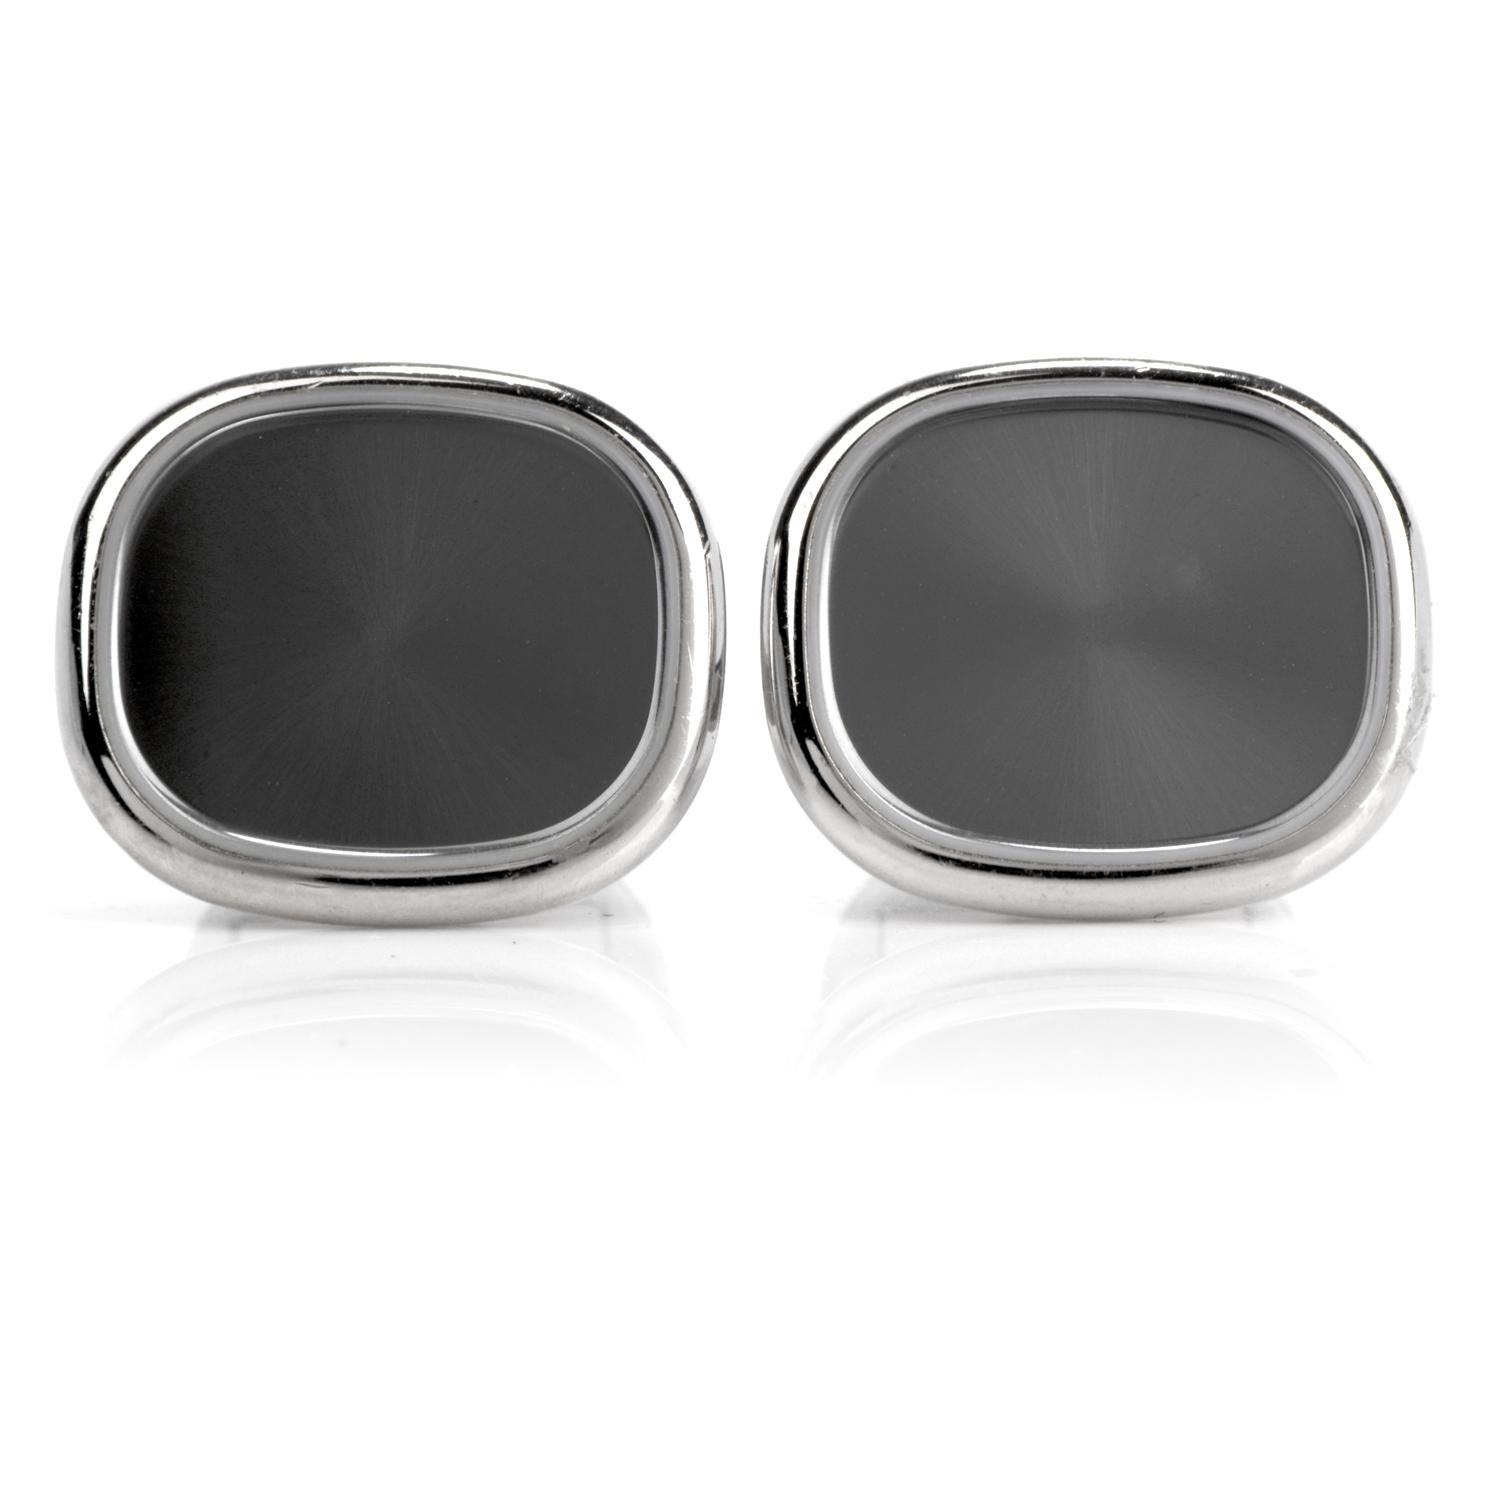 These Patek Philippe Vintage Ellipse Gray 18k White Gold Cufflinks 

were crafted in 18K white gold.

For the Ellipse series, these Cuff Links have a Silvery gray center

in solid 18k White gold and remain in excellent condition

These vinatge